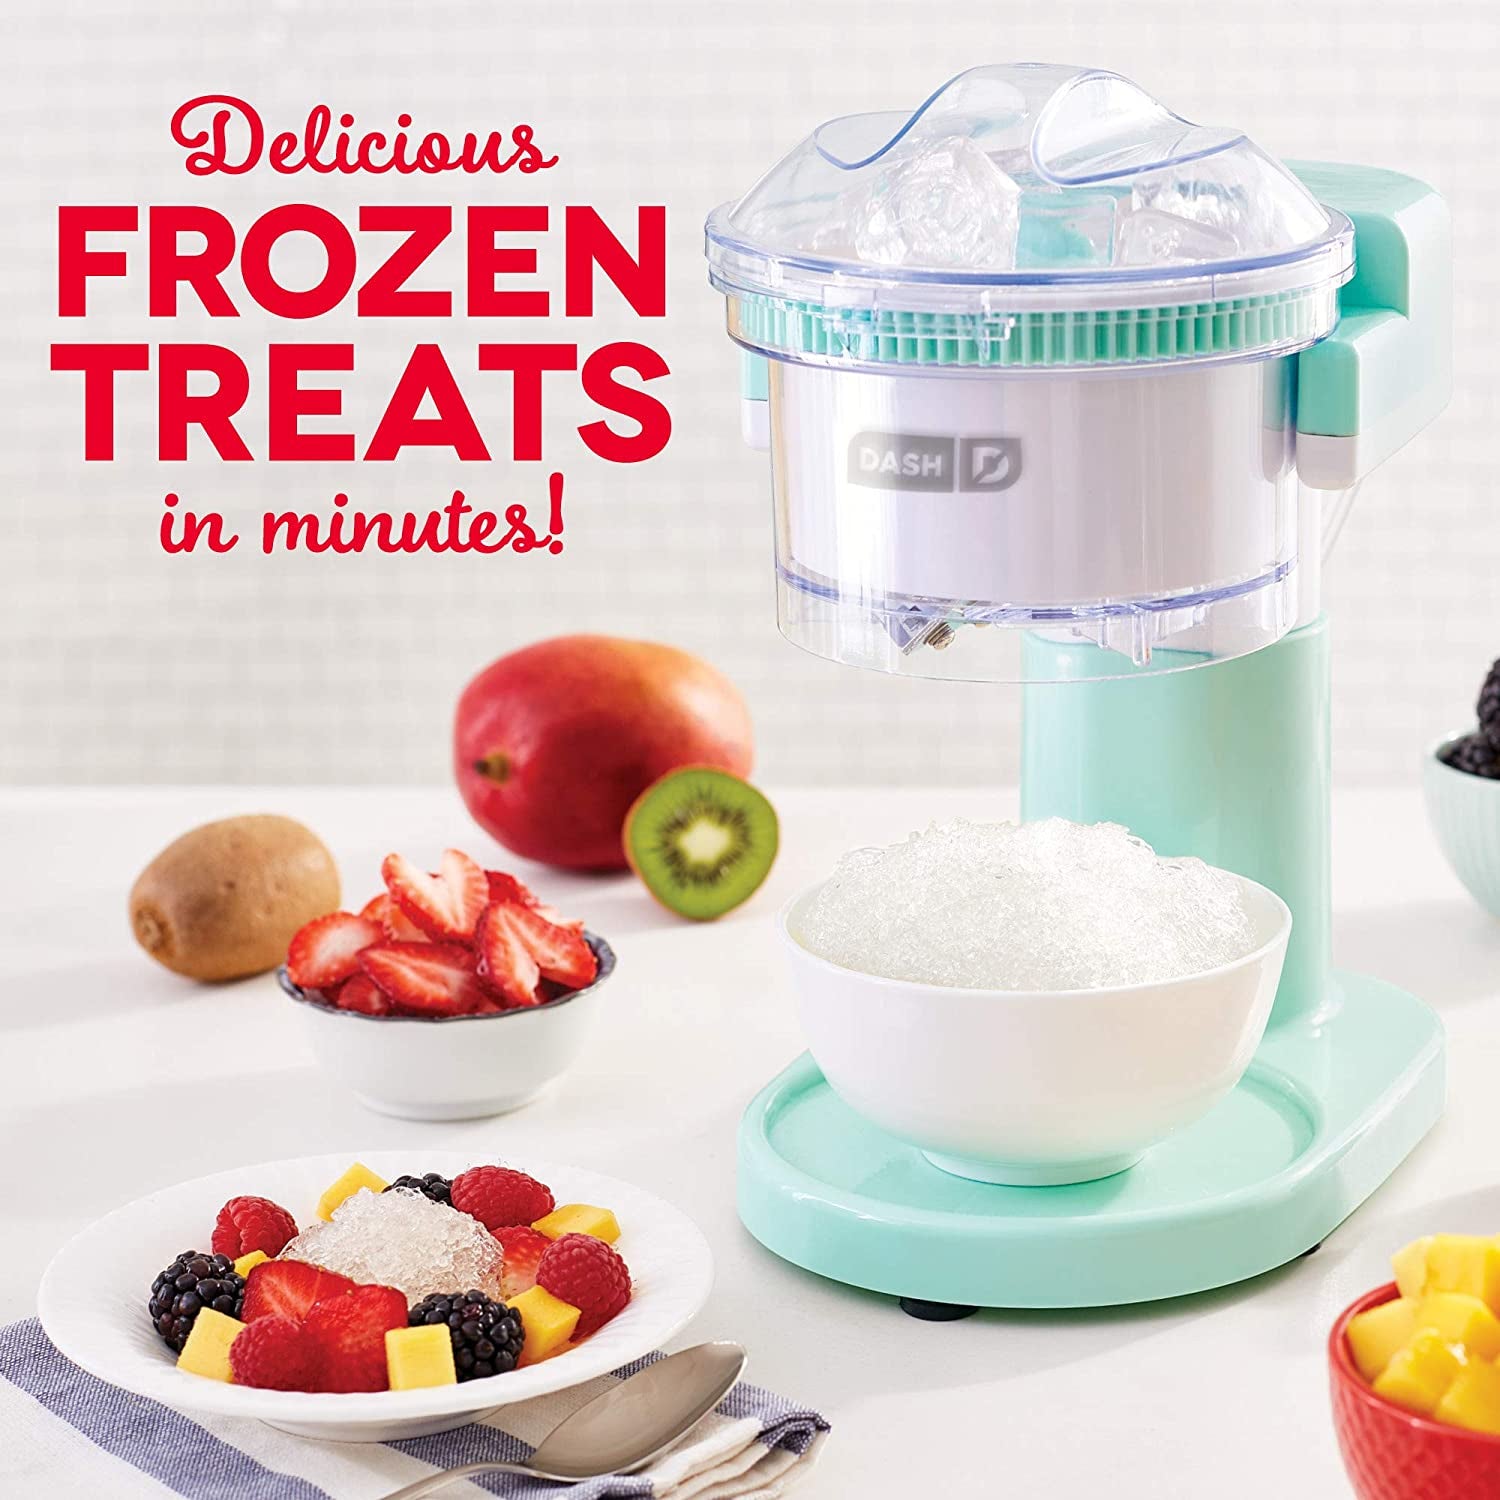 DASH Shaved Ice Maker + Slushie Machine with Stainless Steel Blades for Snow Cone, Margarita + Frozen Cocktails, Organic, Sugar Free, Flavored Healthy Snacks for Kids & Adults - Aqua